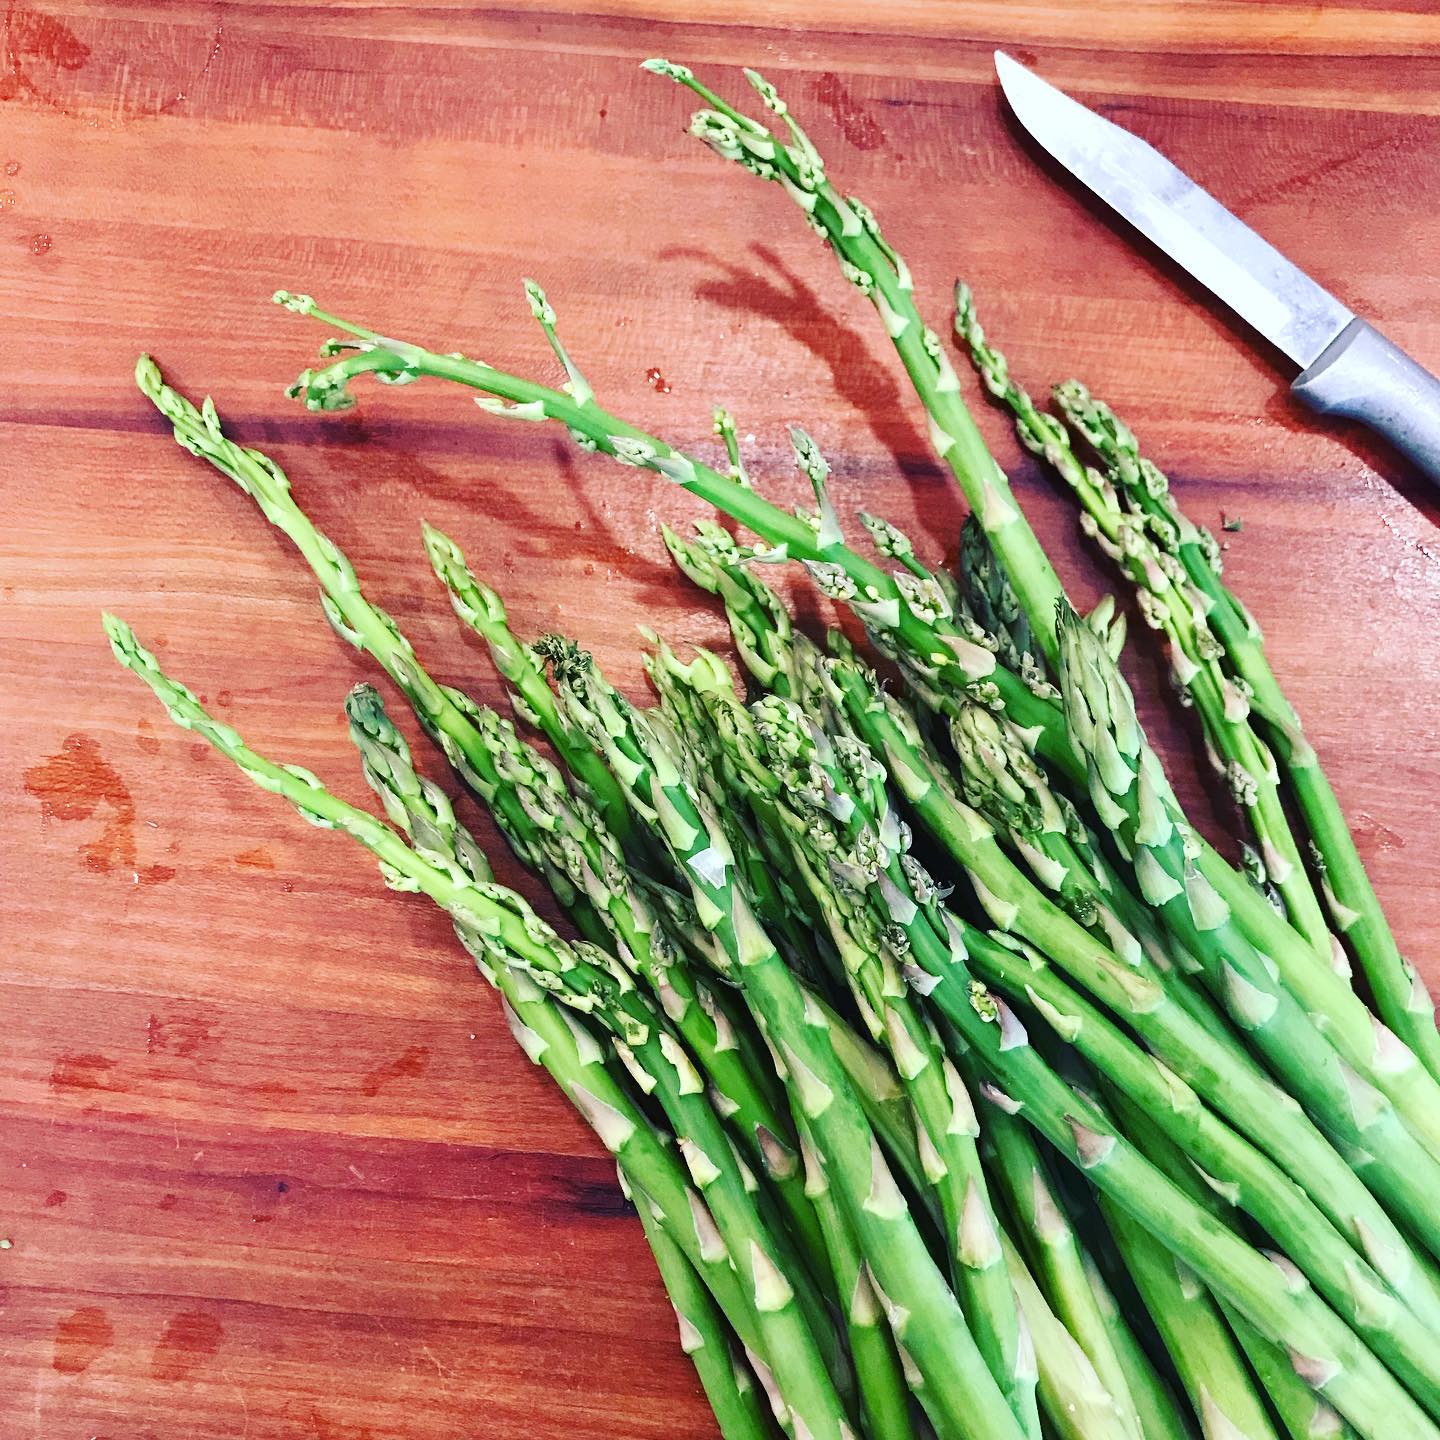 I always put my asparagus in water when I get home from the grocery store. And guess what, it starts to grow! 🌱 (Just trim the stems before setting the bunch in a cup.) 
.
.
#freshveggies #asparagus #springveggies